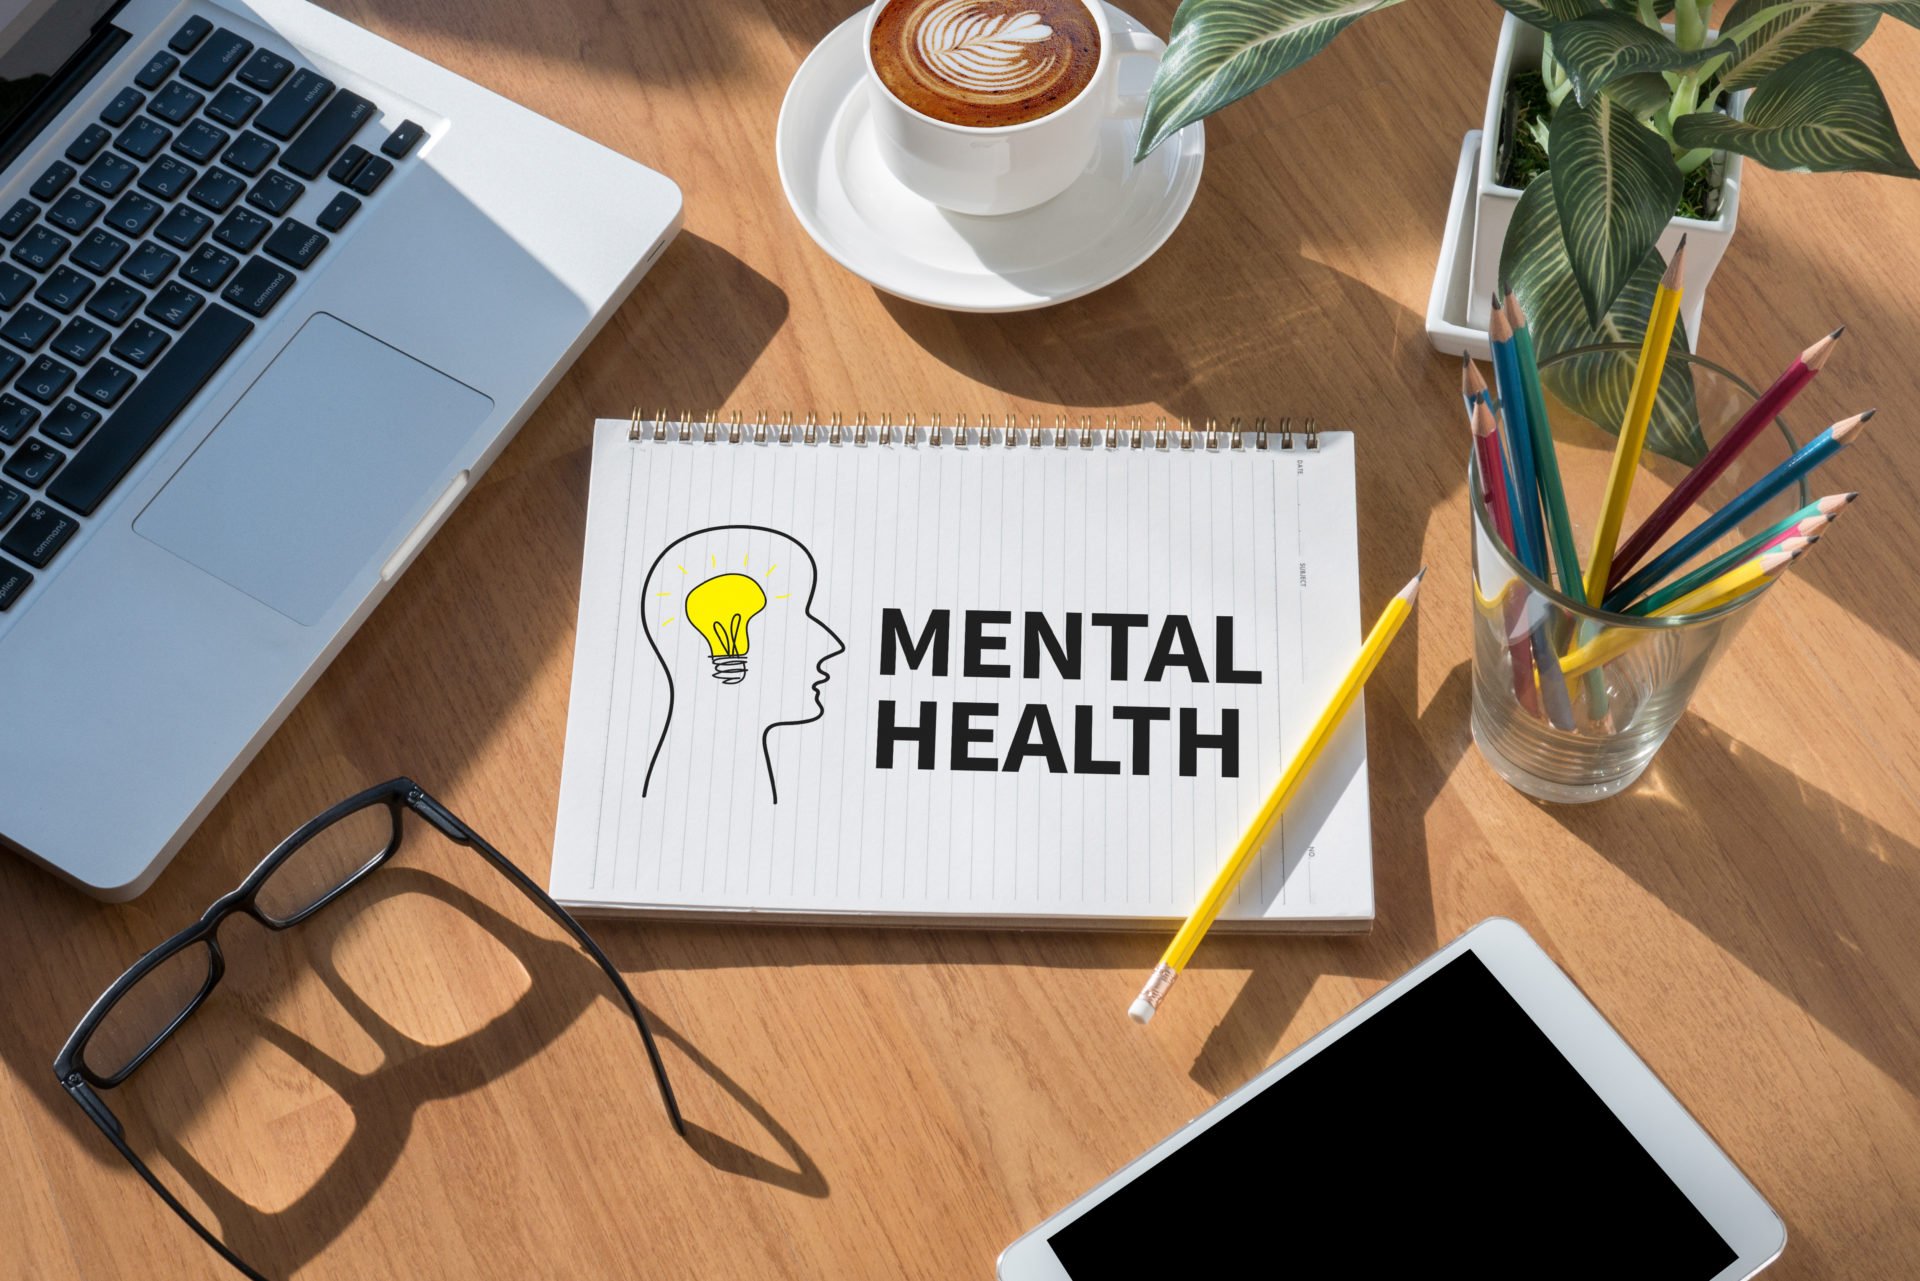 Mental Health "First Aid" Course (£695 total for this 1-day course for a group of up to 12 people)